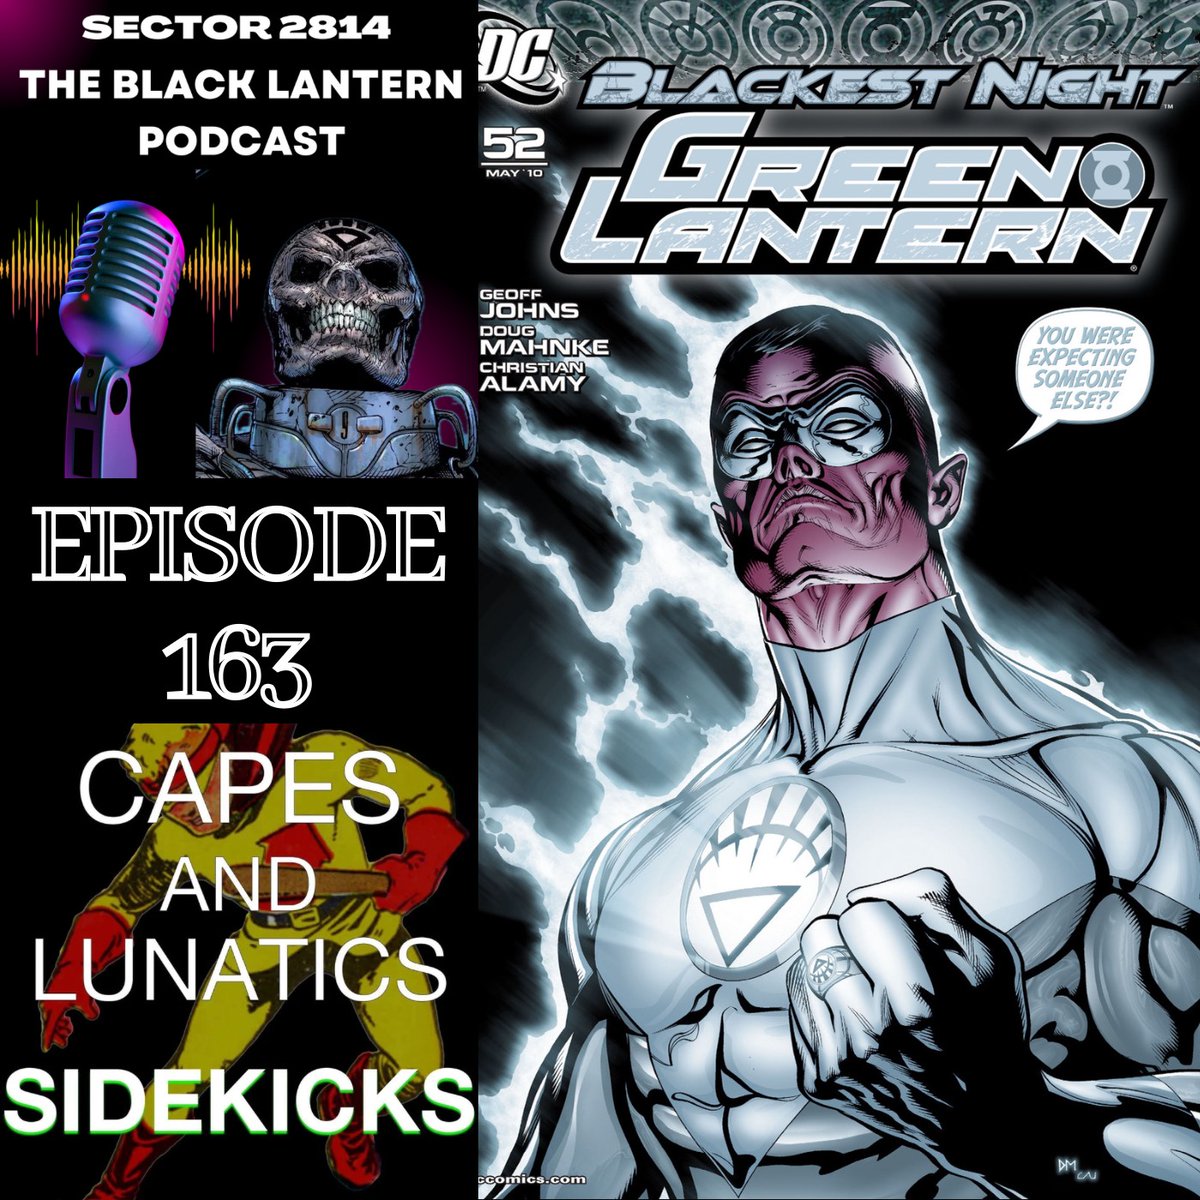 Sector 2814: The Green Lantern Podcast Episode #163 tinyurl.com/2s3k4txb Phil and Will finish the Blackest Night coverage with reviews of #GreenLantern #52, Blackest Night #8, Green Lantern Corps #47, Action Comics #890, and Untold Tales of the Blackest Night #1. #dccomics